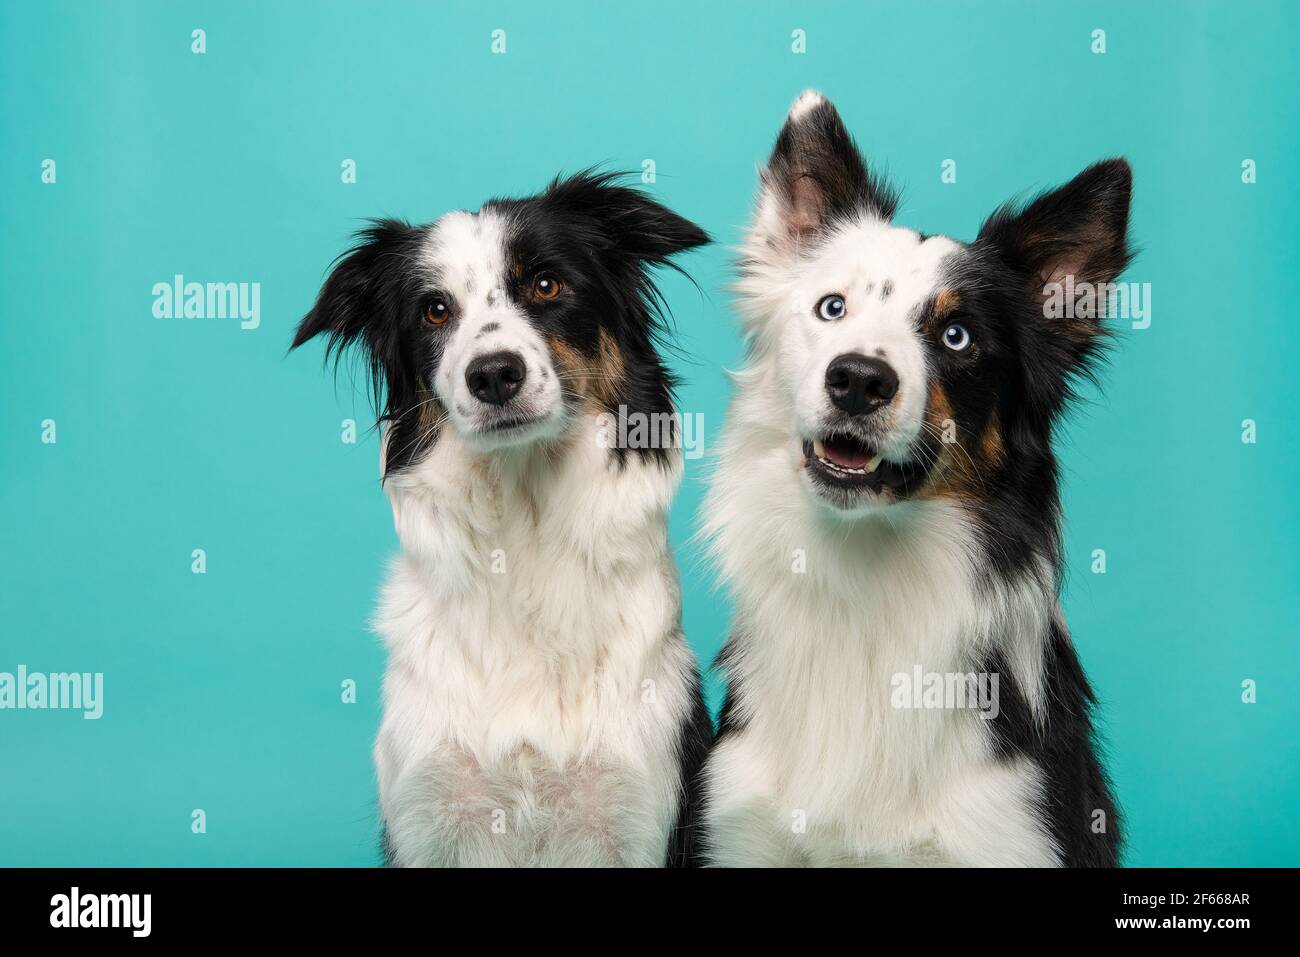 Portrait of two border collie dogs on a turquoise blue background Stock Photo